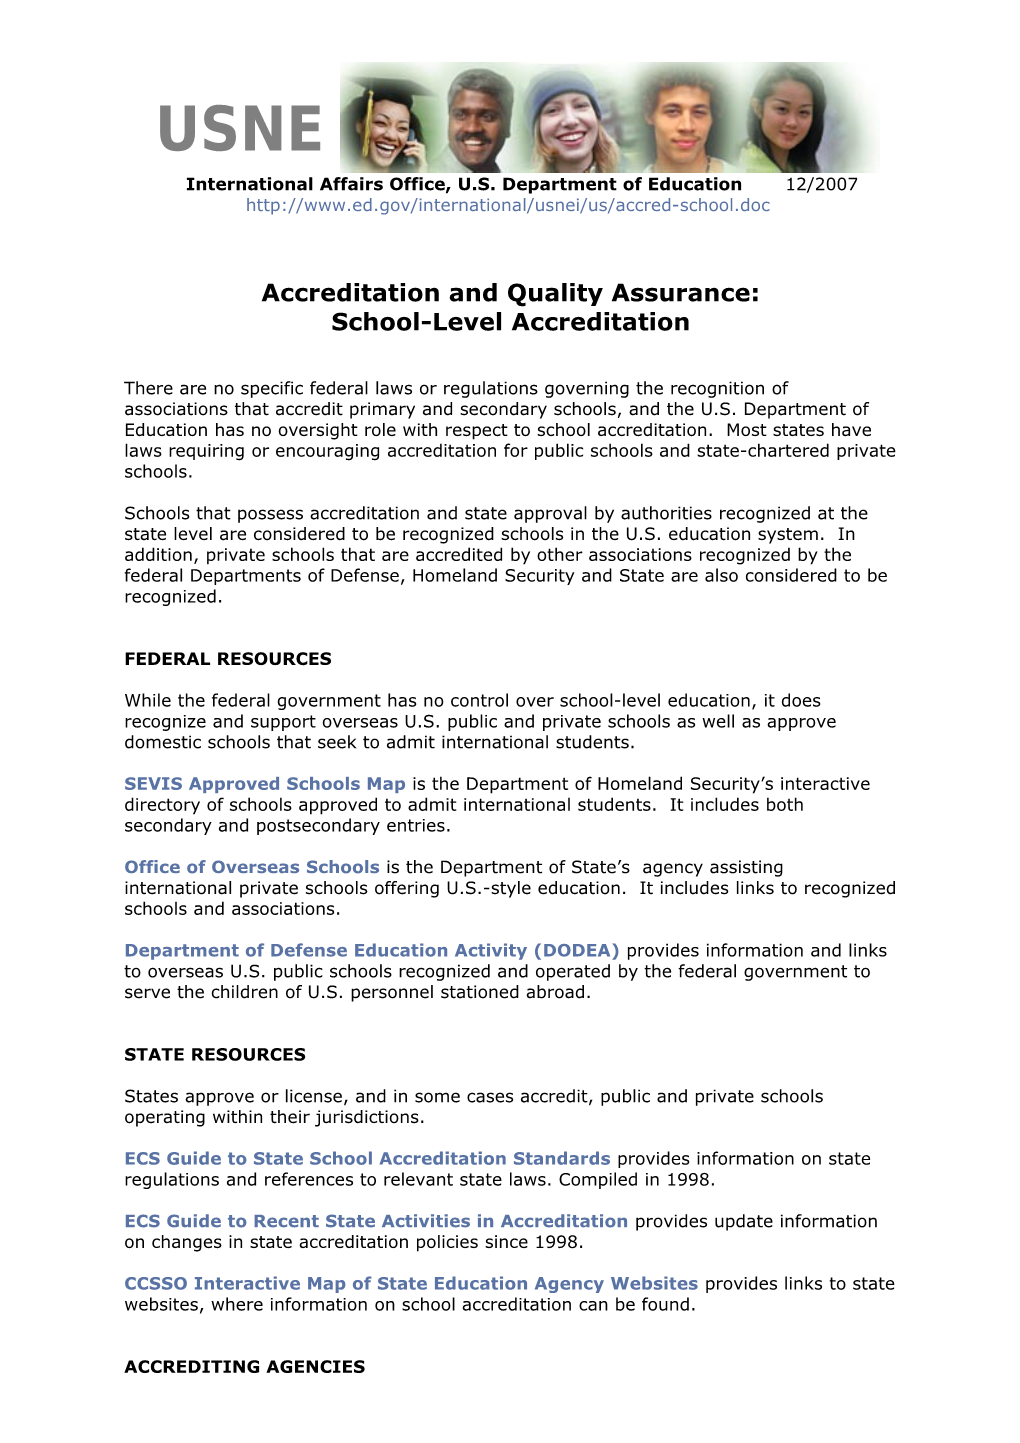 Accreditation and Quality Assurance: School-Level Accreditation (MS Word)